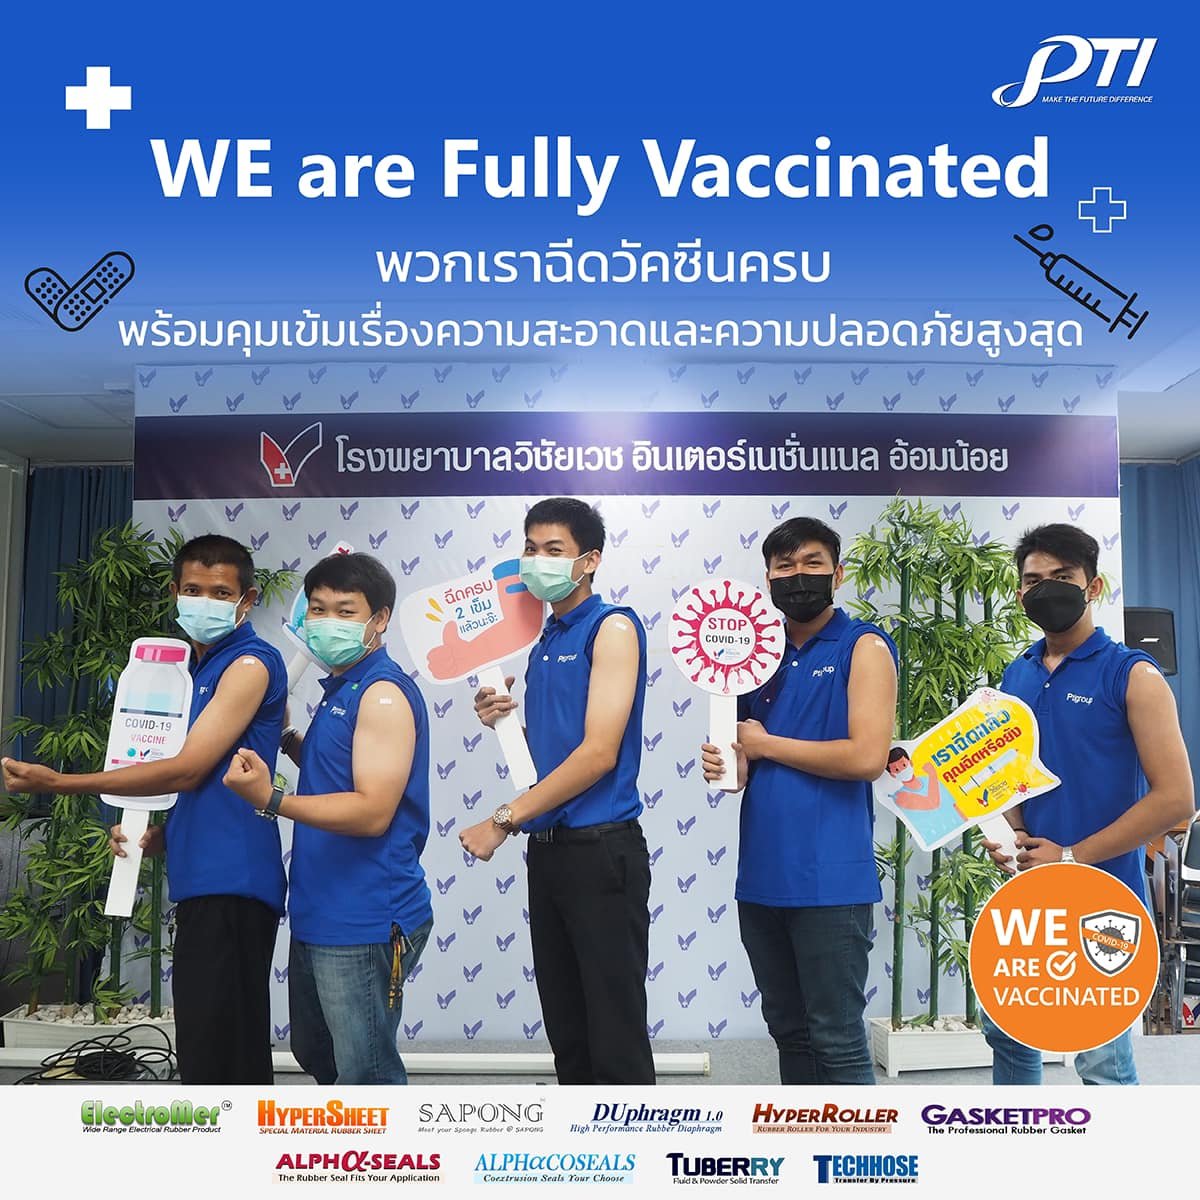 We are Fully Vaccinated - Polytech Industry 